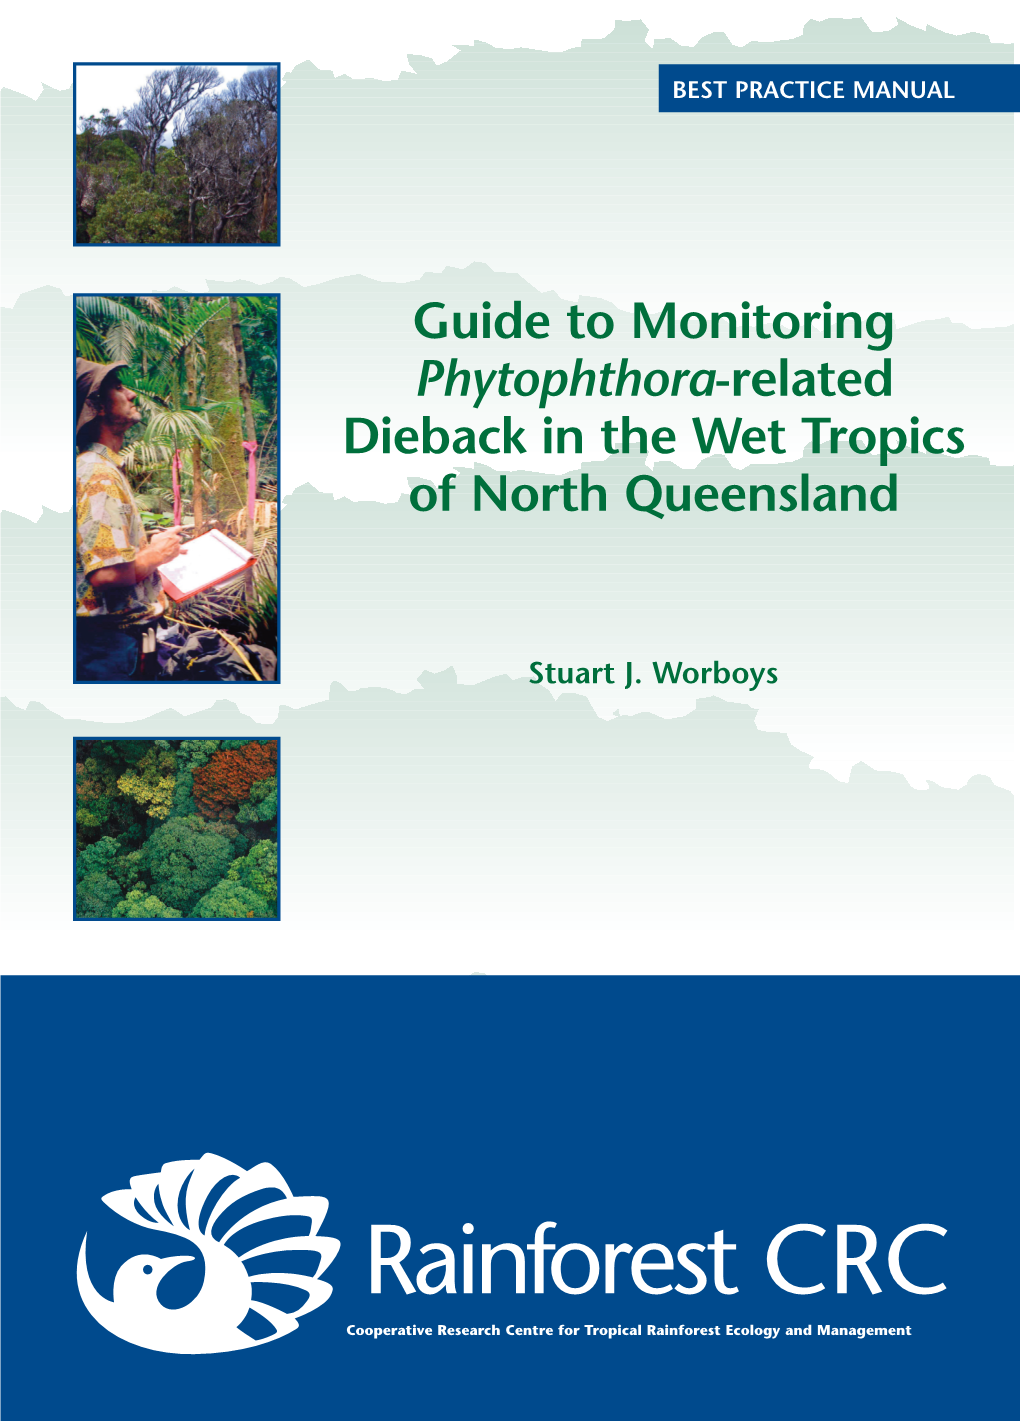 Guide to Monitoring Phytophthora-Related Dieback in the Wet Tropics of North Queensland